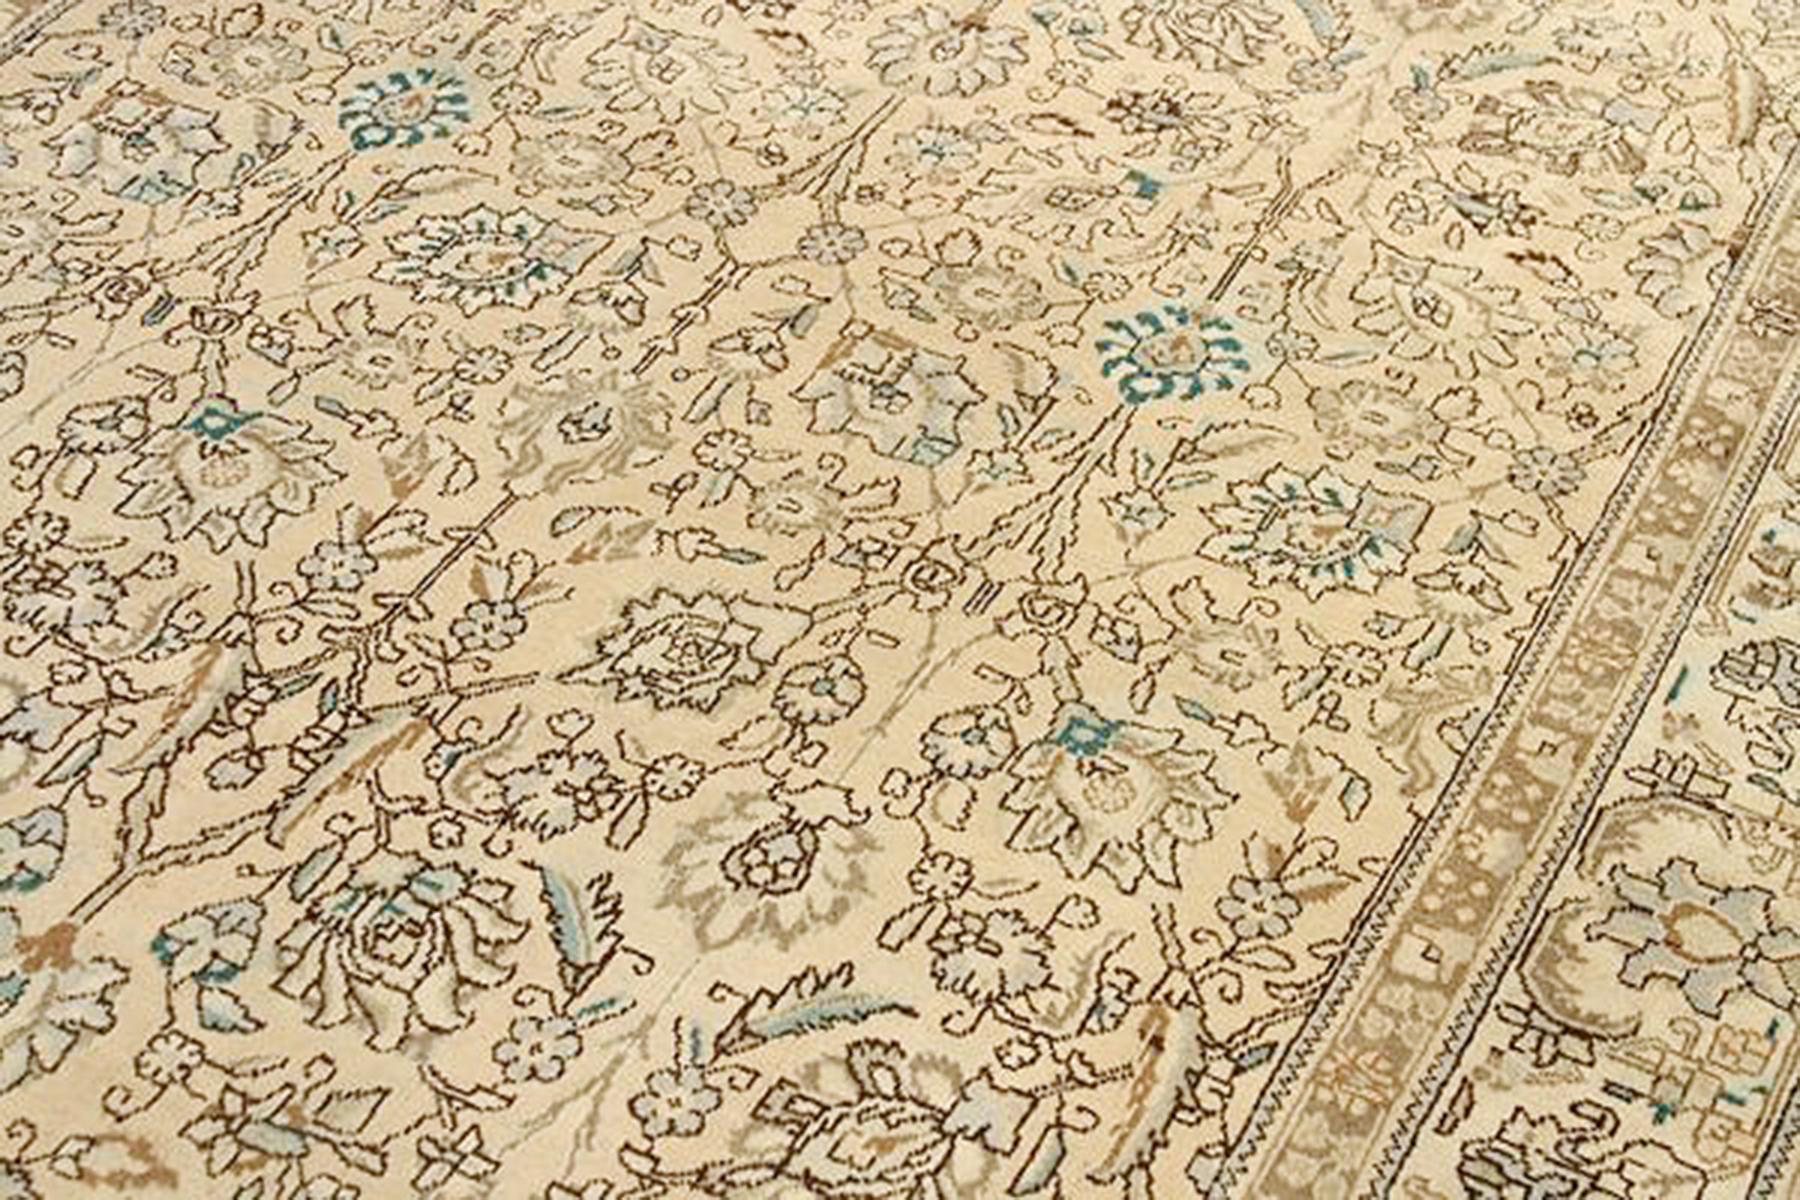 Hand-Woven Antique Persian Tabriz Rug with Black and Green Floral Details on Beige Field For Sale